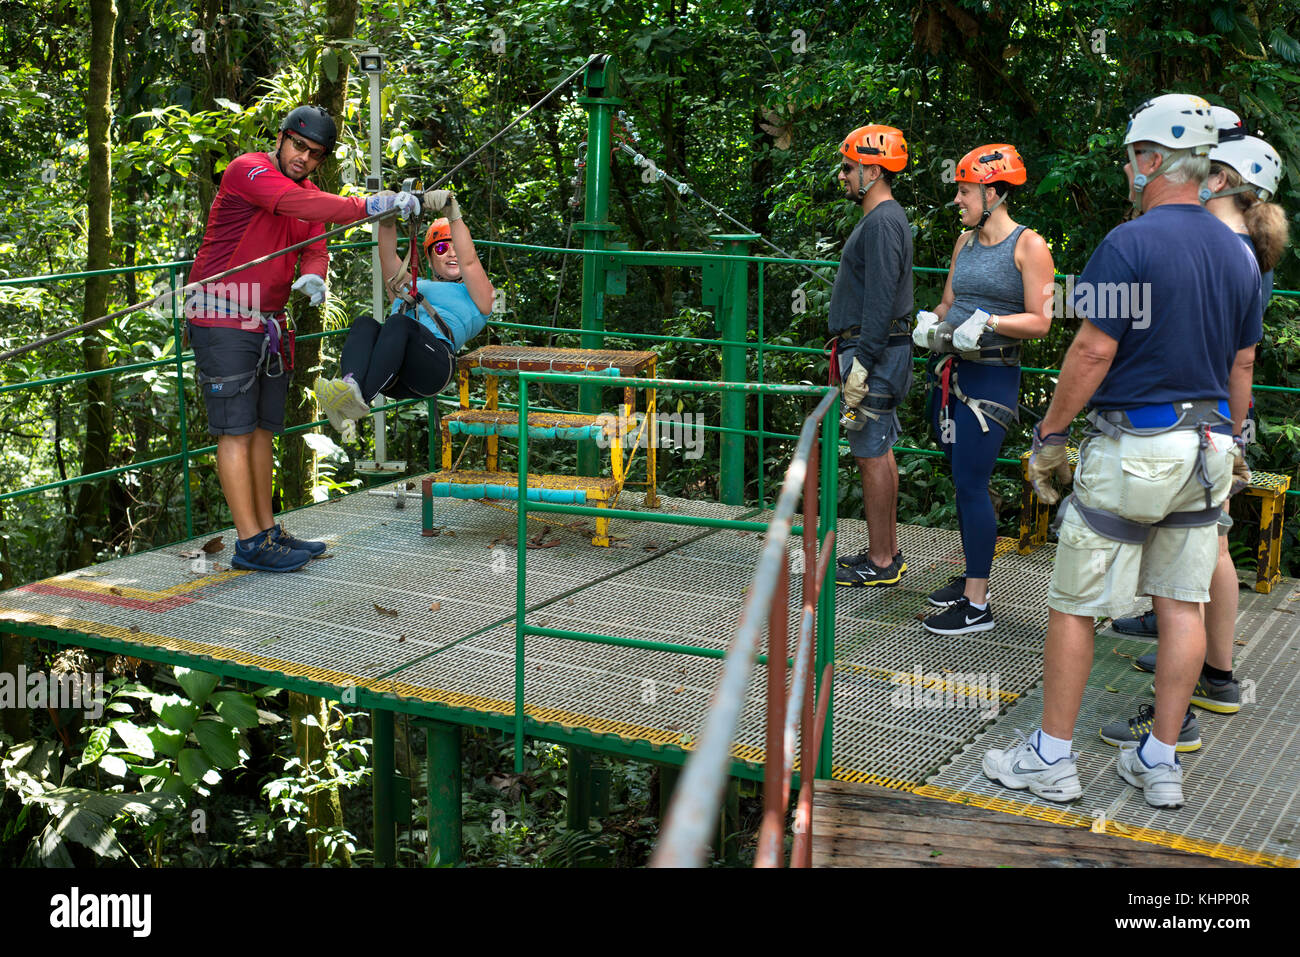 Zipe line canopy in Arenal Costa Rica Central America. Stock Photo